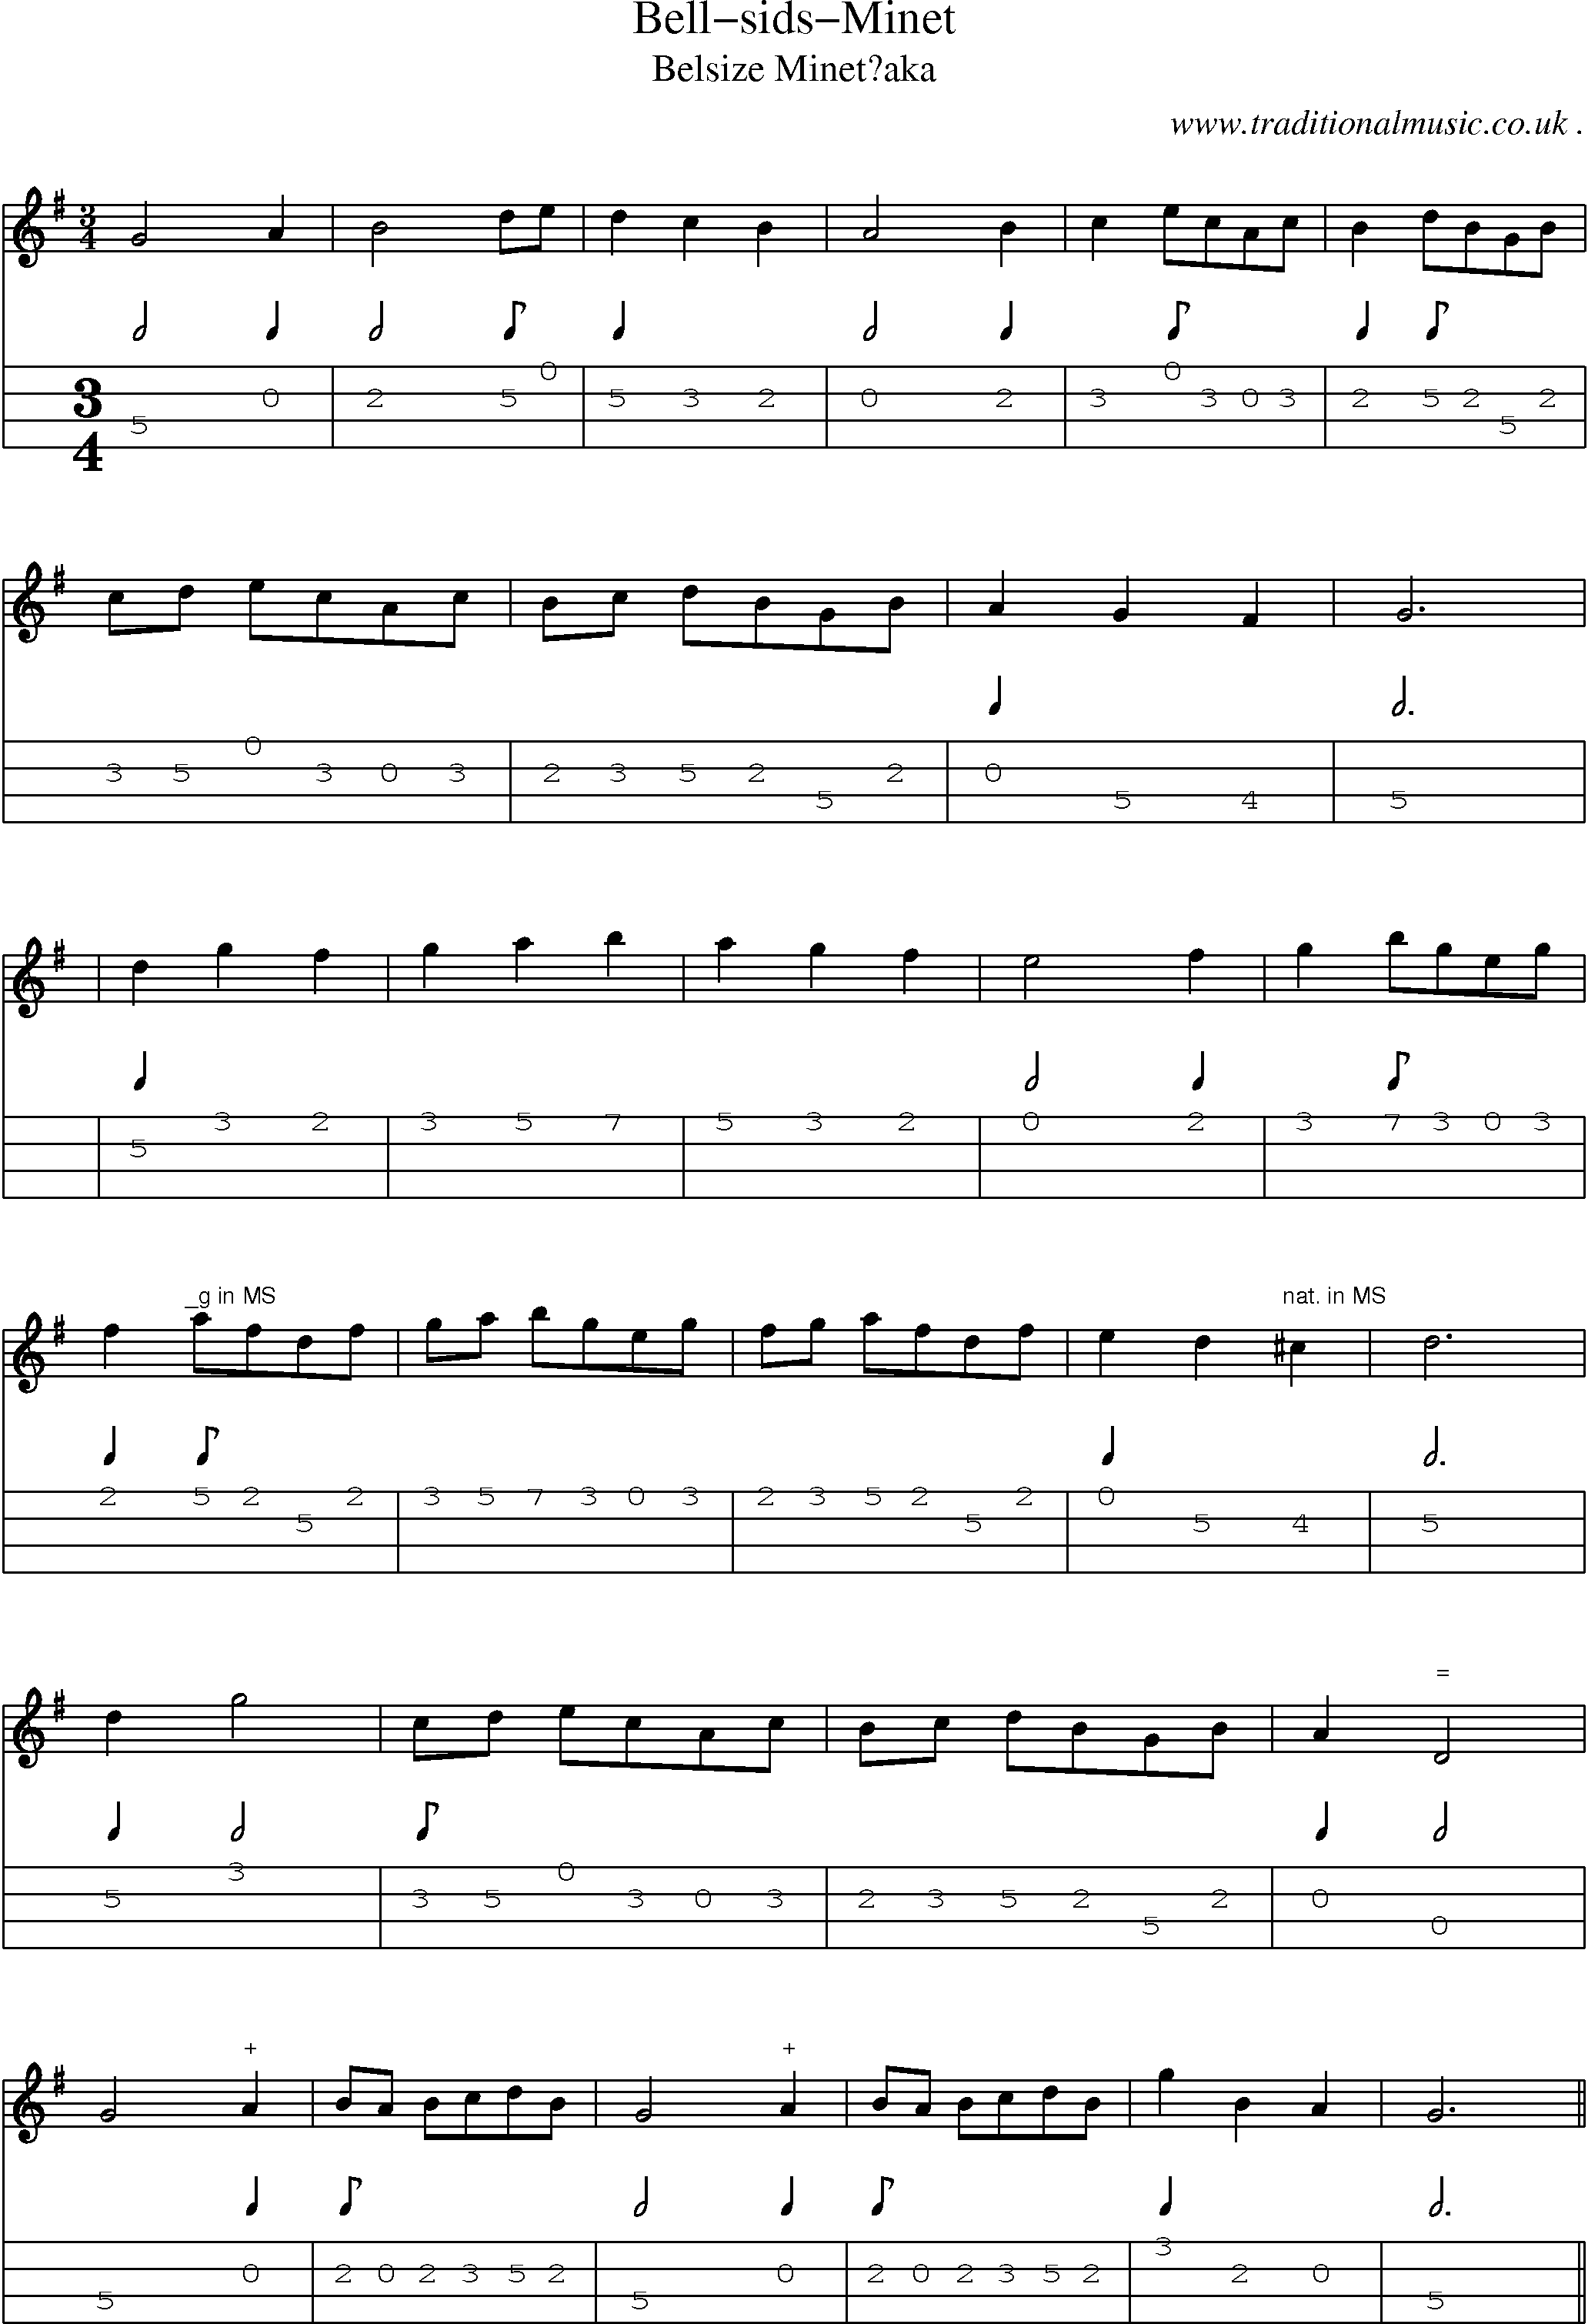 Sheet-Music and Mandolin Tabs for Bell-sids-minet